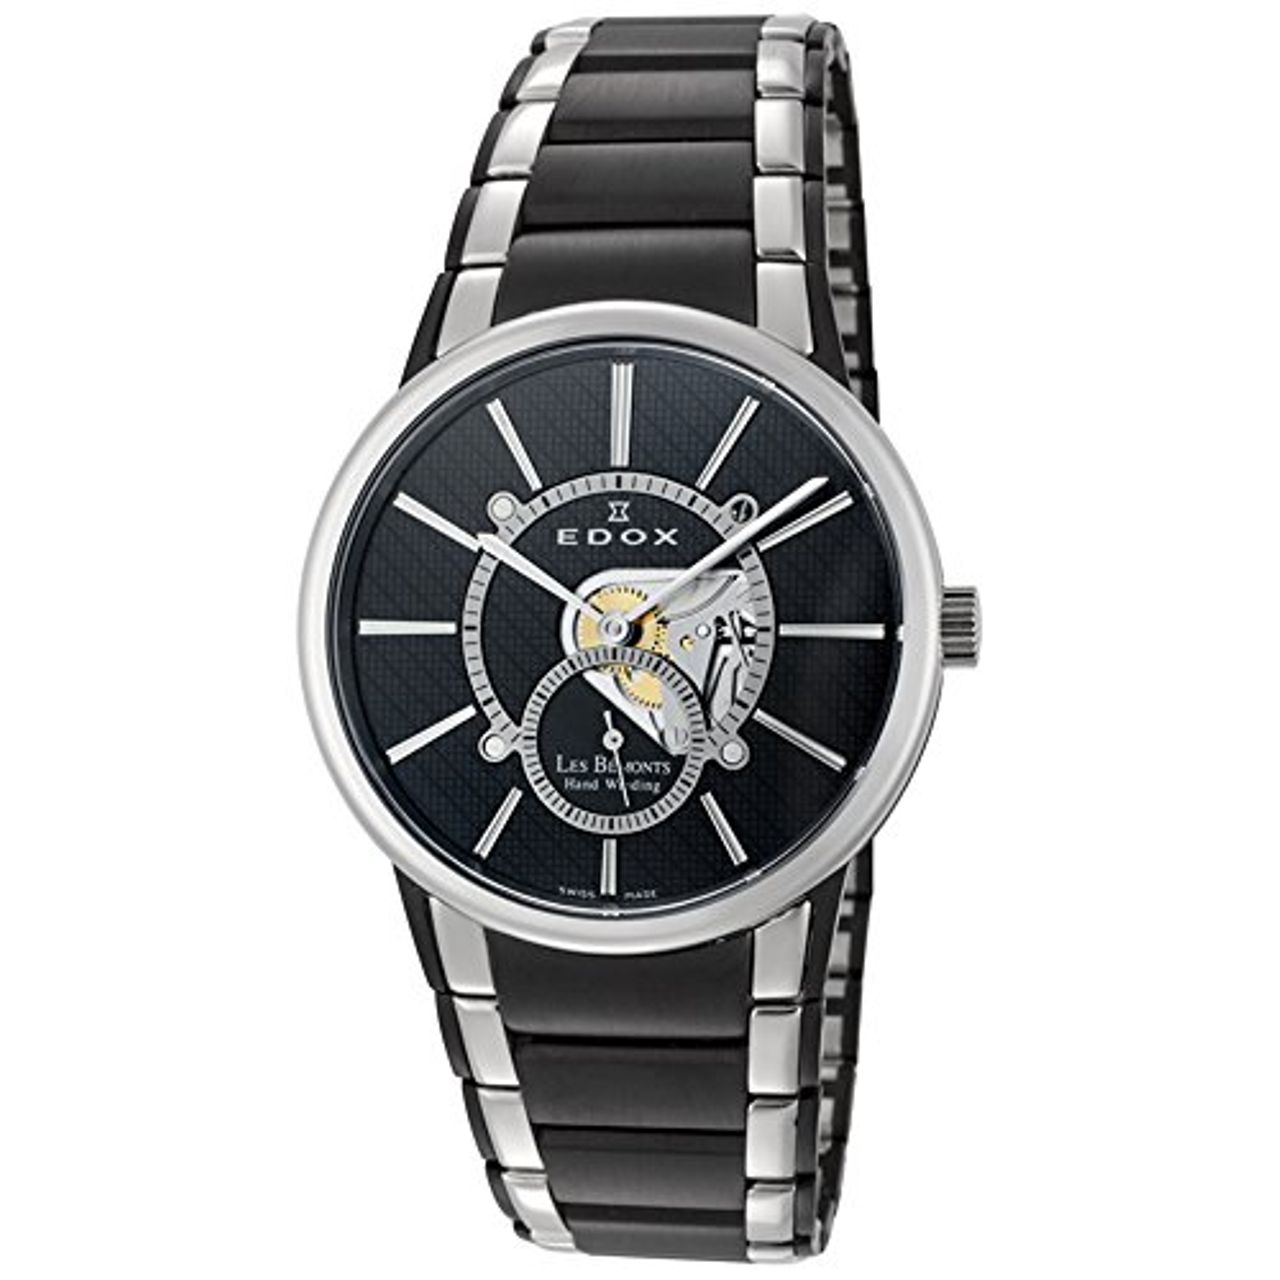 Edox 72011 357N NIN Mens Black Dial Mechanical Watch with Stainless Steel Strap